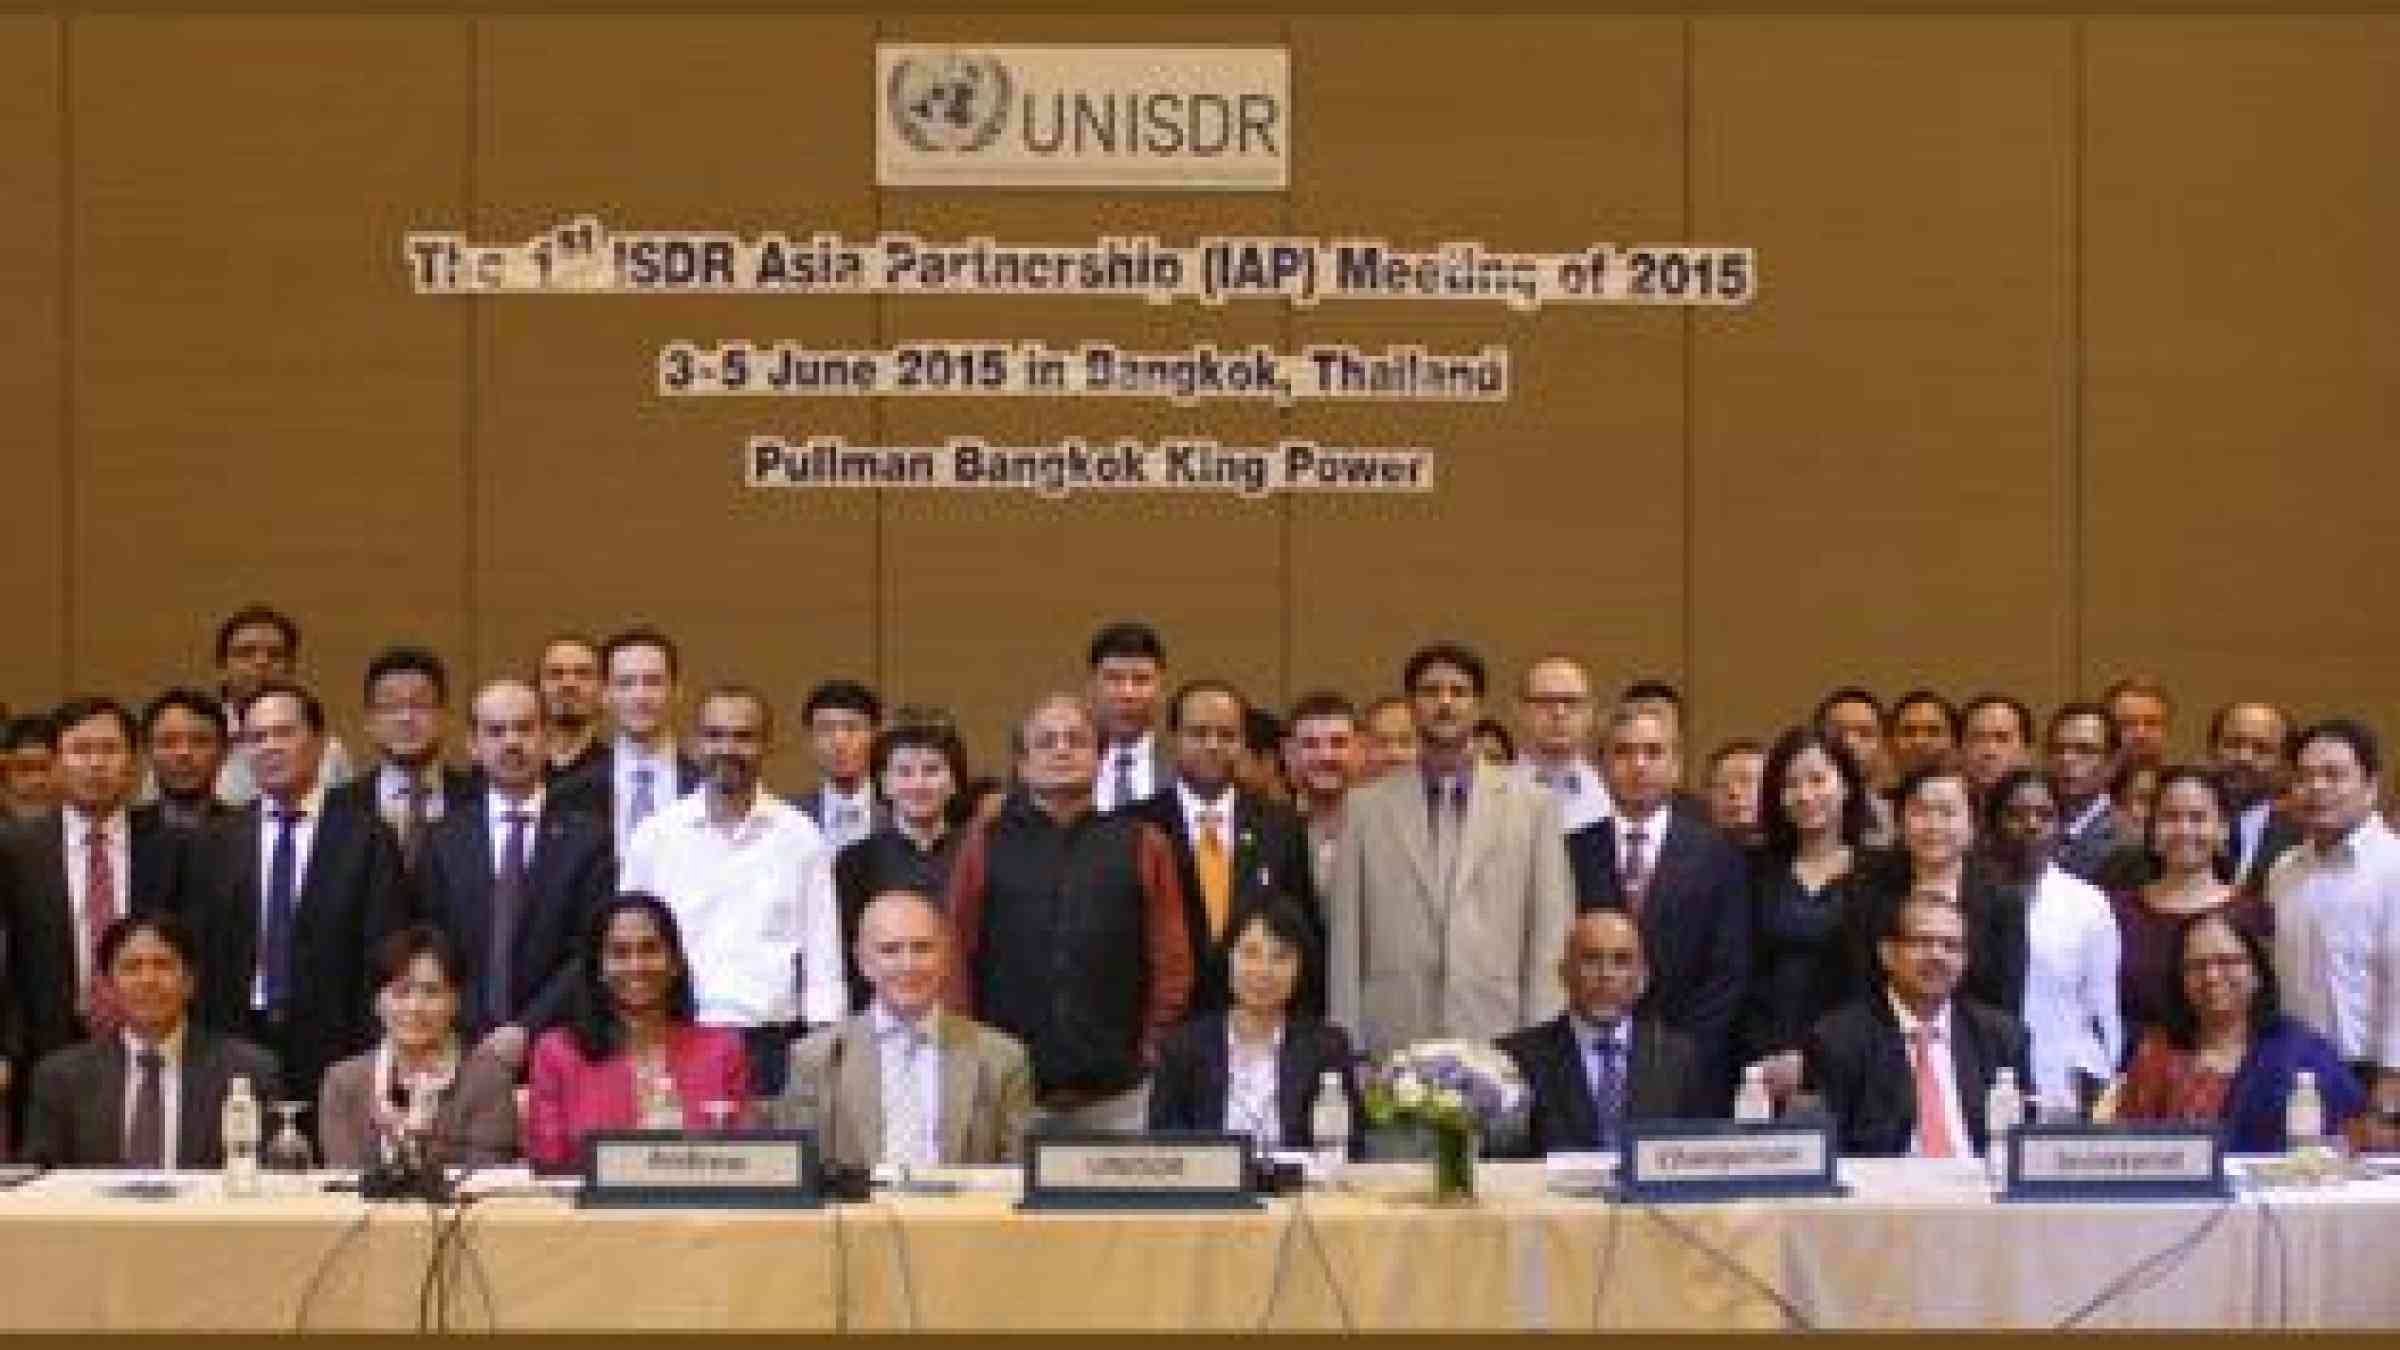 Over 90 representatives from 17 countries in Asia and various regional and international organizations attended this week's ISDR Asia Partnership meeting in Bangkok. (Photo: UNISDR)